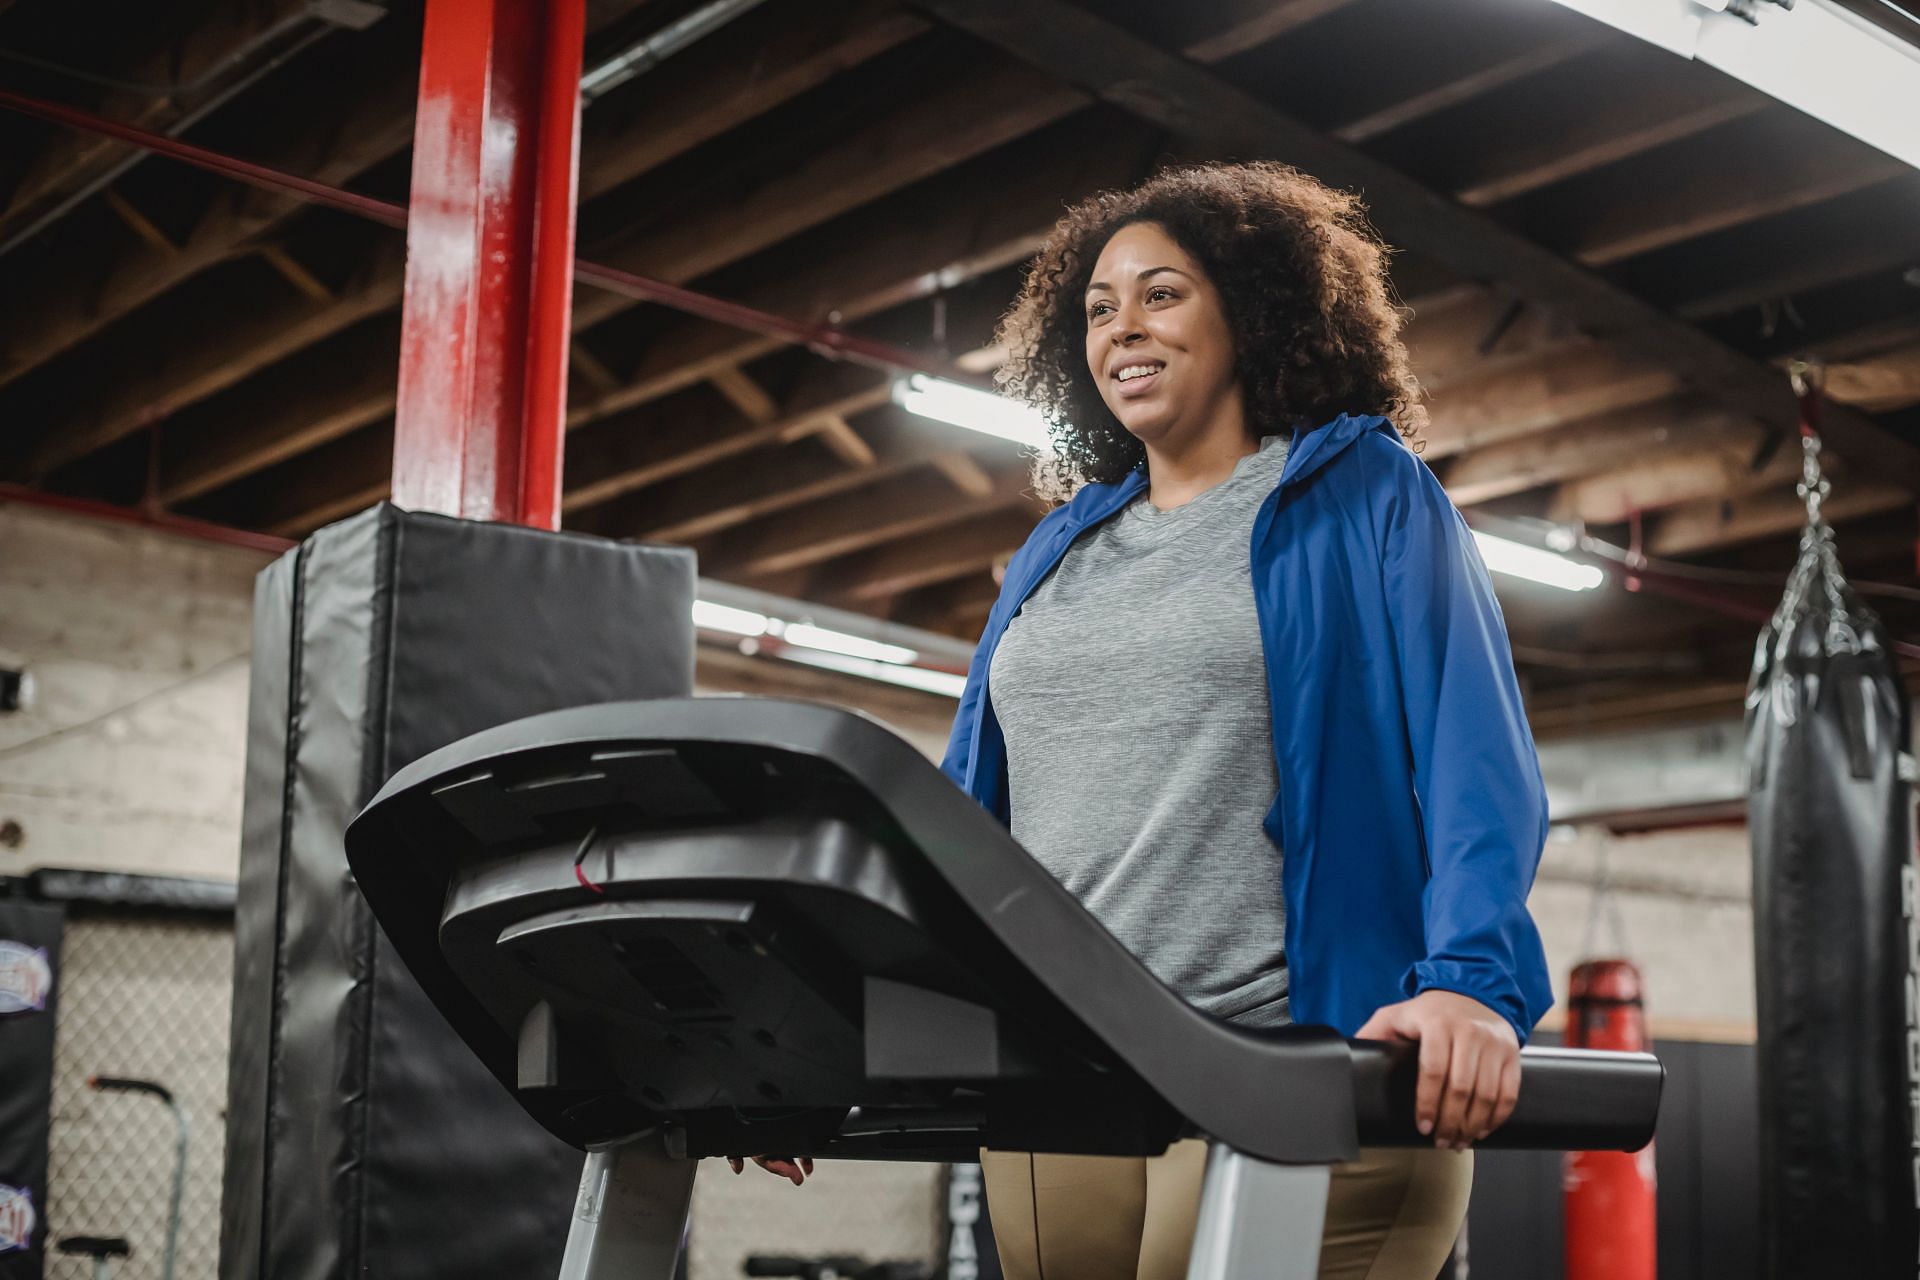 30-minutes a Day on the Treadmill - Lifestyle Change for a Better